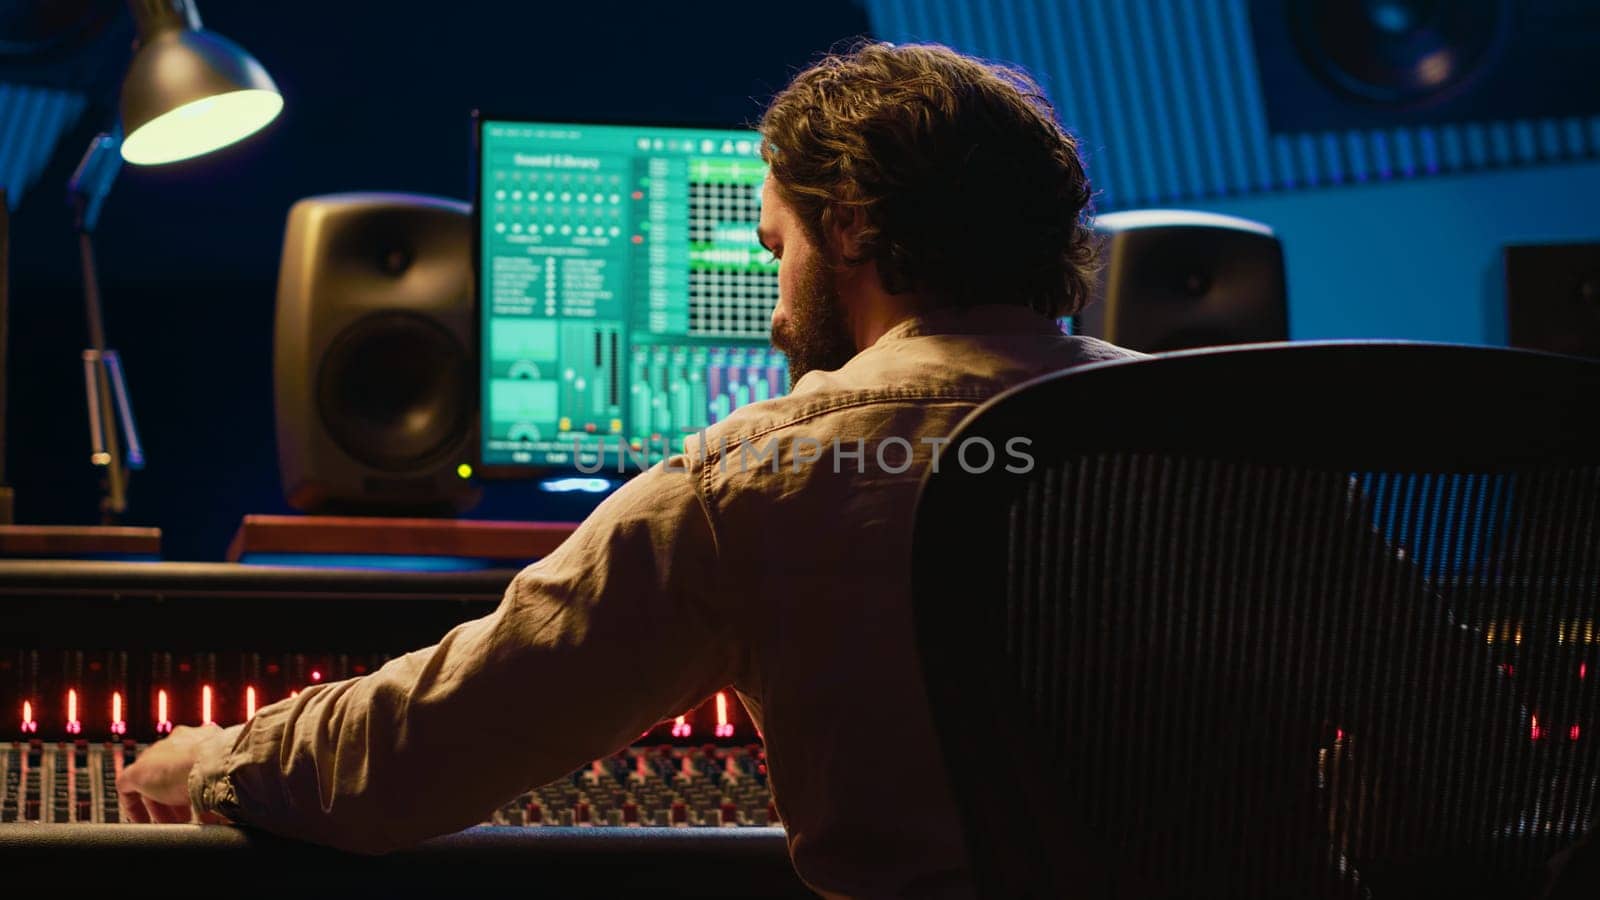 Sound designer mixing and mastering tracks on audio console in control room by DCStudio